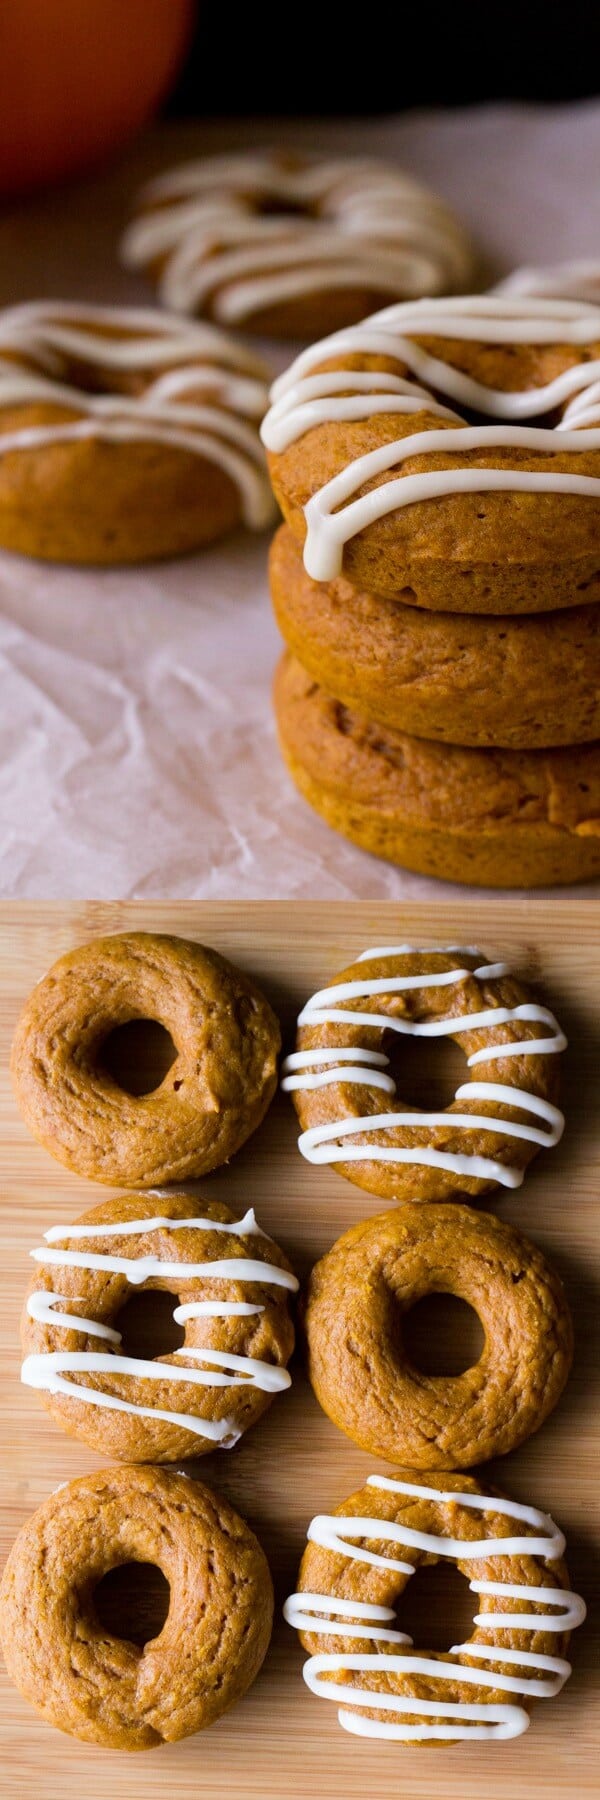 Baked Pumpkin Cake Doughnuts with Cream Cheese Glaze are the perfect fall treat. Ready in 30 minutes from start to finish - try them for breakfast or afternoon coffee!